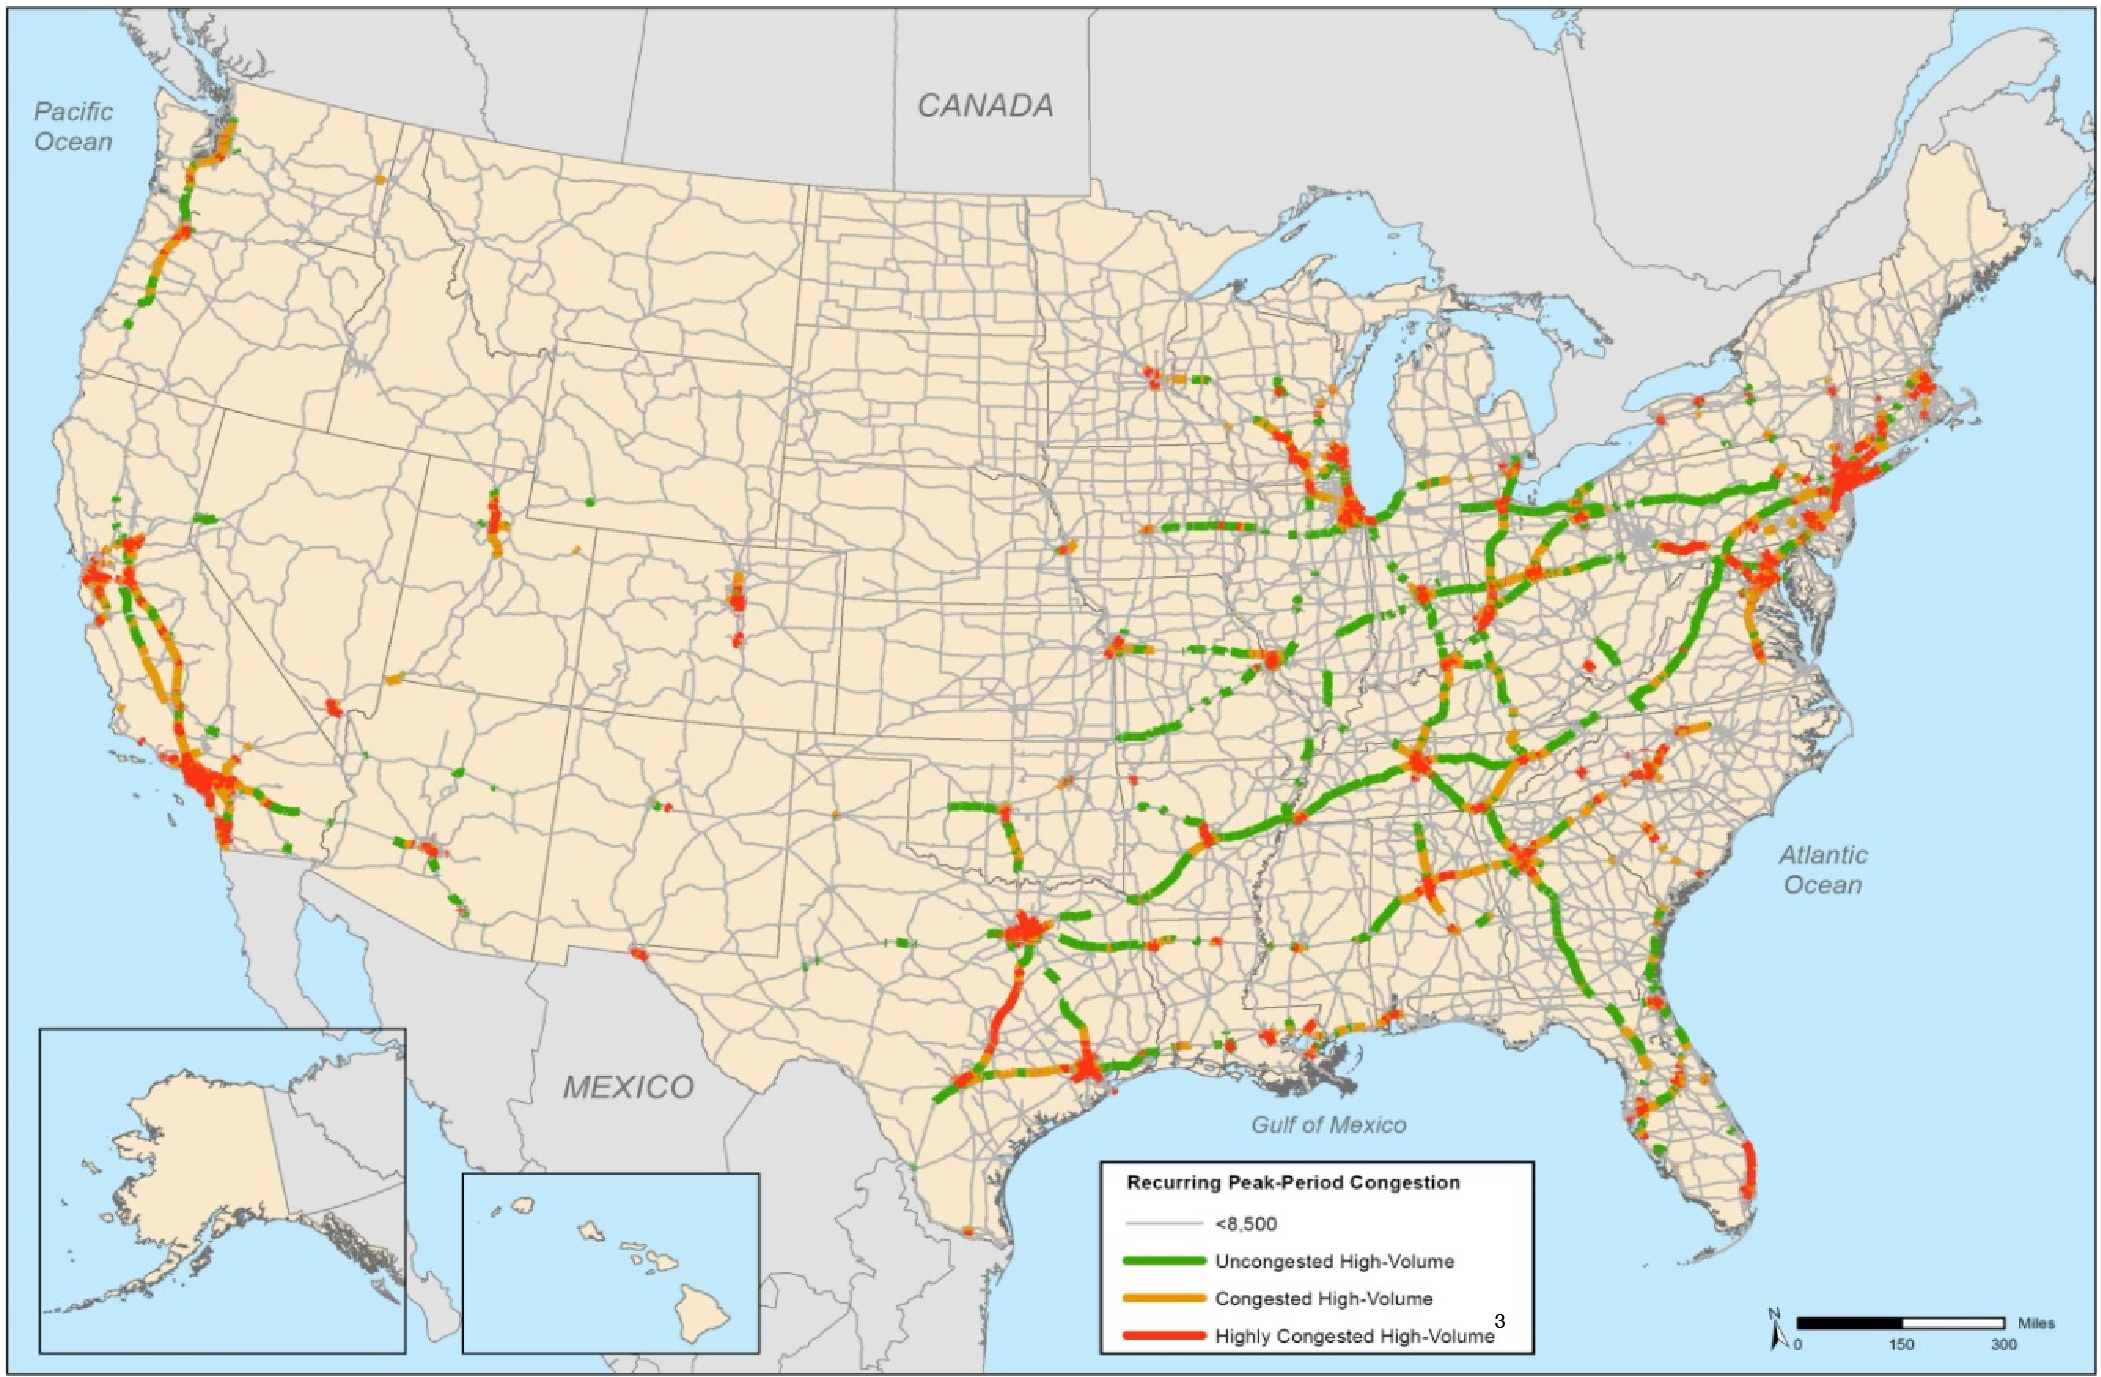 An outline map of the 48 contiguous states and insets for Alaska and Hawaii show recurring peak-period congestion. Peak-period congestion is indicated by line thickness and color for uncongested high-volume (green), congested high-volume (yellow), and highly congested high-volume (red). Uncongested high-volume truck portions are spread throughout the eastern half of the United States; these are also shown in western California, Oregon, and Washington. Congested high-volume truck portions display their heaviest volume in the north and southeast, as well as western California, Oregon, and Washington. Highly congested high-volume truck portions show the heaviest volume in northeastern states, areas of the Midwest, portions of Texas, and southwest California. <em>Sources: U.S. Department of Transportation, Federal Highway Administration, Office of Freight Management and Operations, Freight Analysis Framework, version 3.4, 2013.